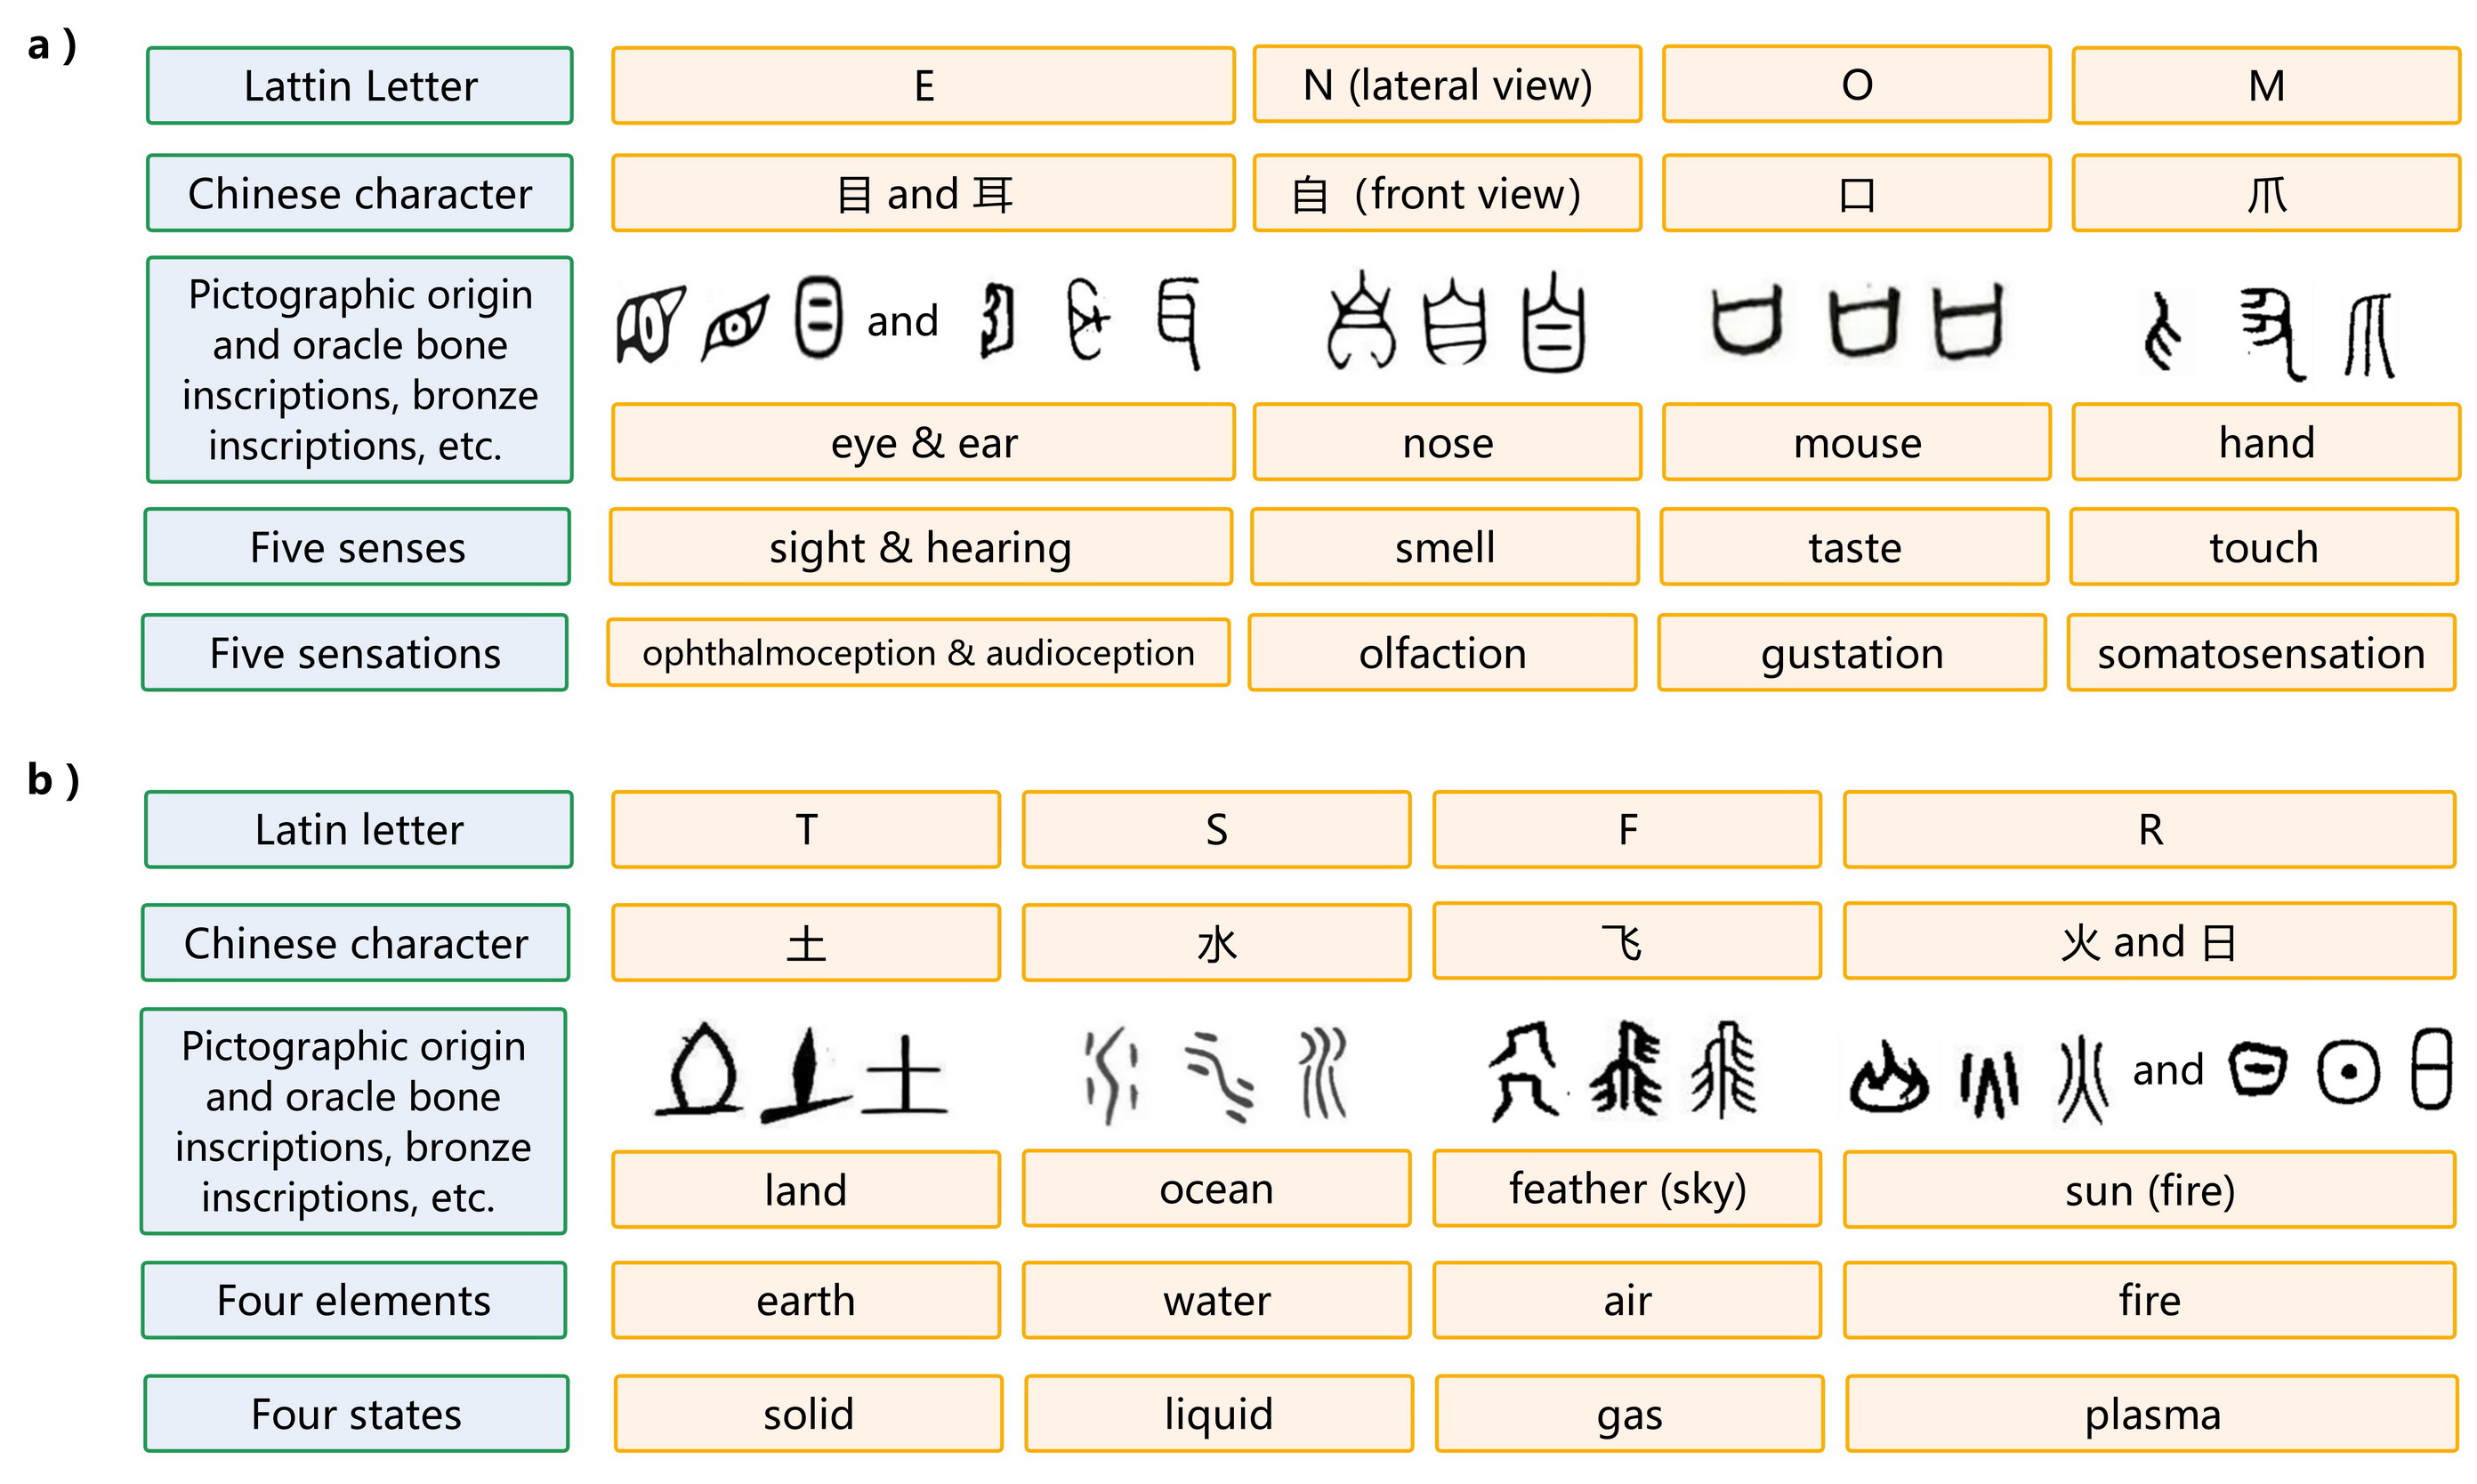 Fig.6 for editor Pictographic origin of Latin letters and Chinese characters.jpg